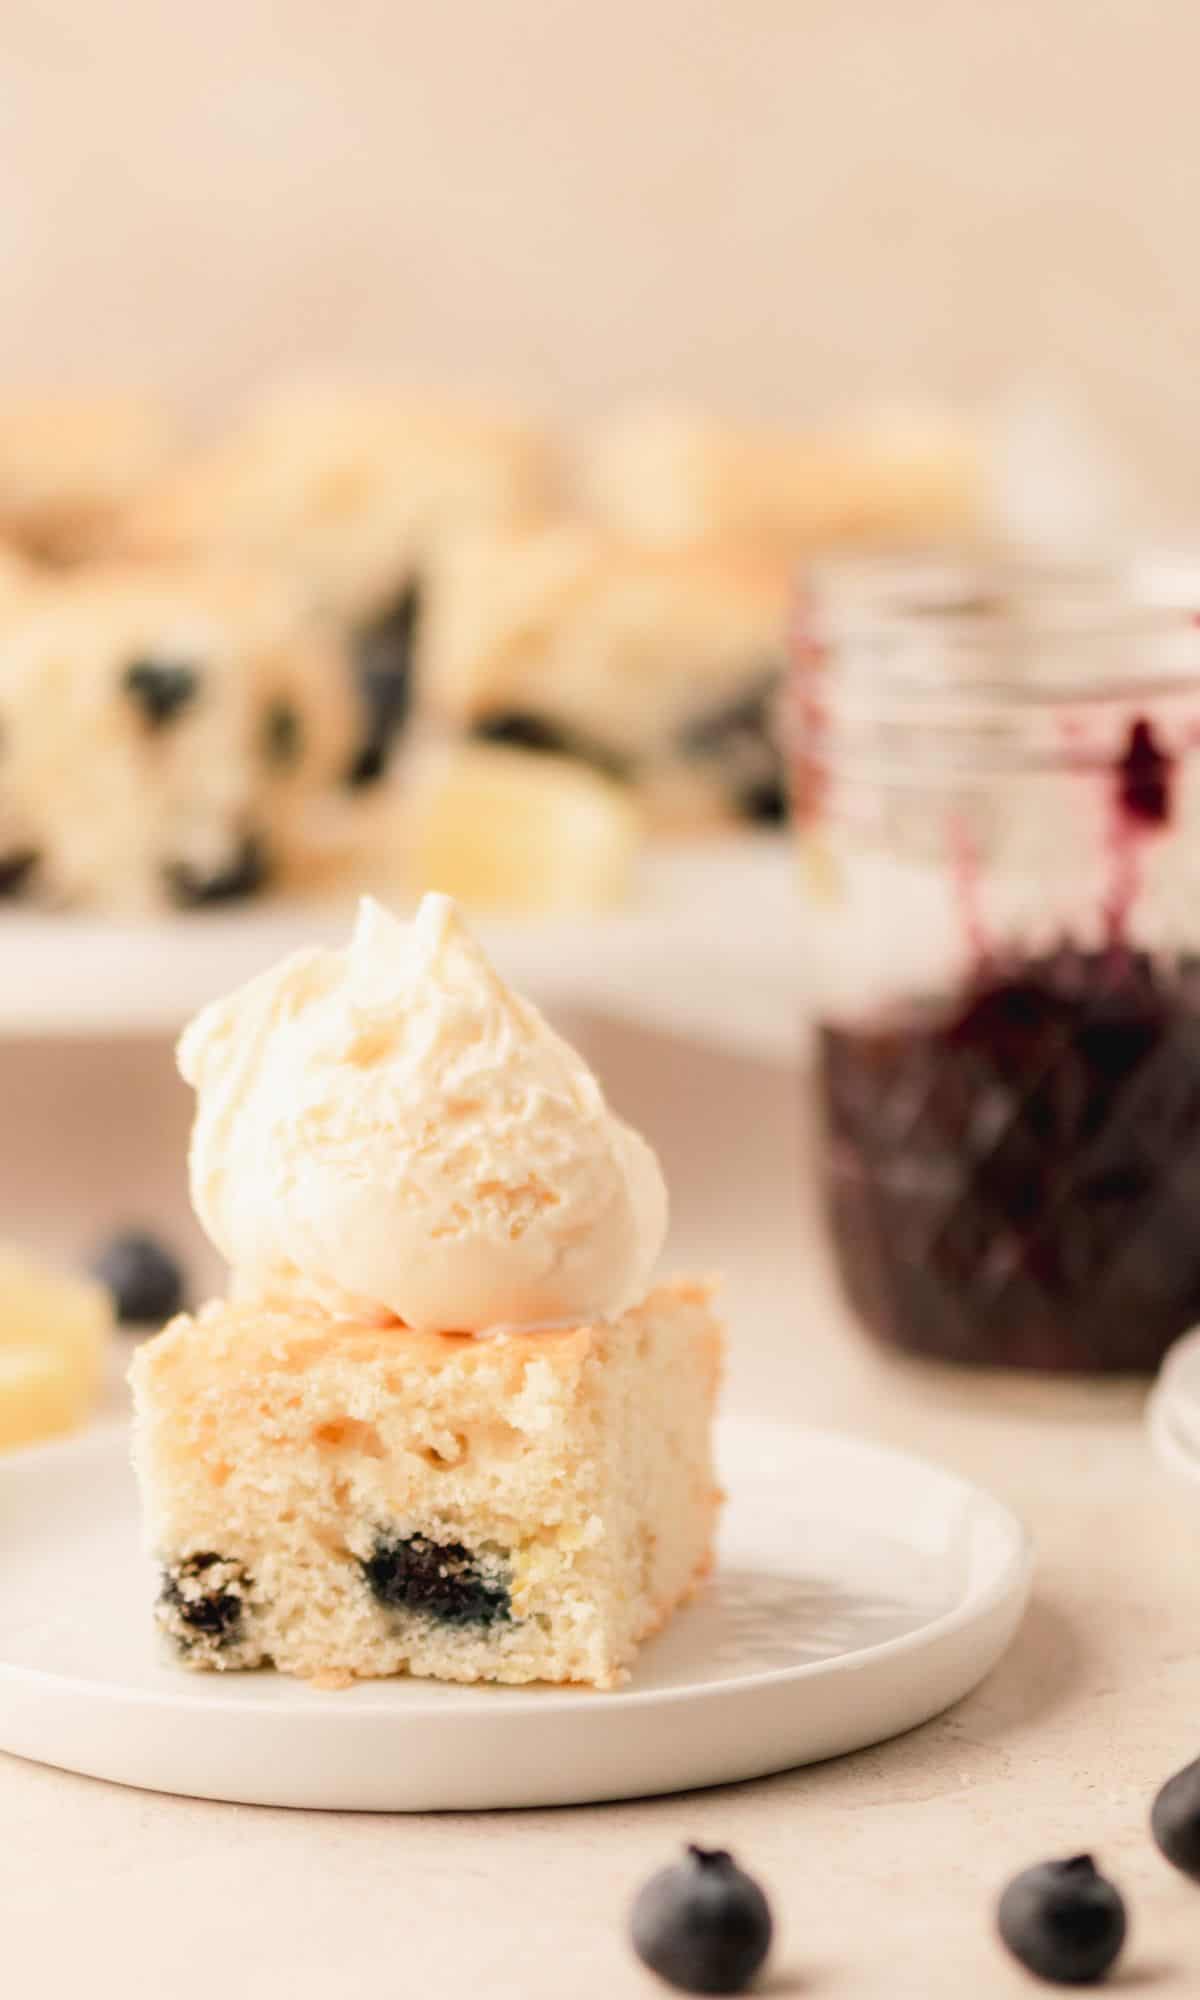 A piece of buttermilk cake with blueberries and a scoop of ice cream on top on a white plate.